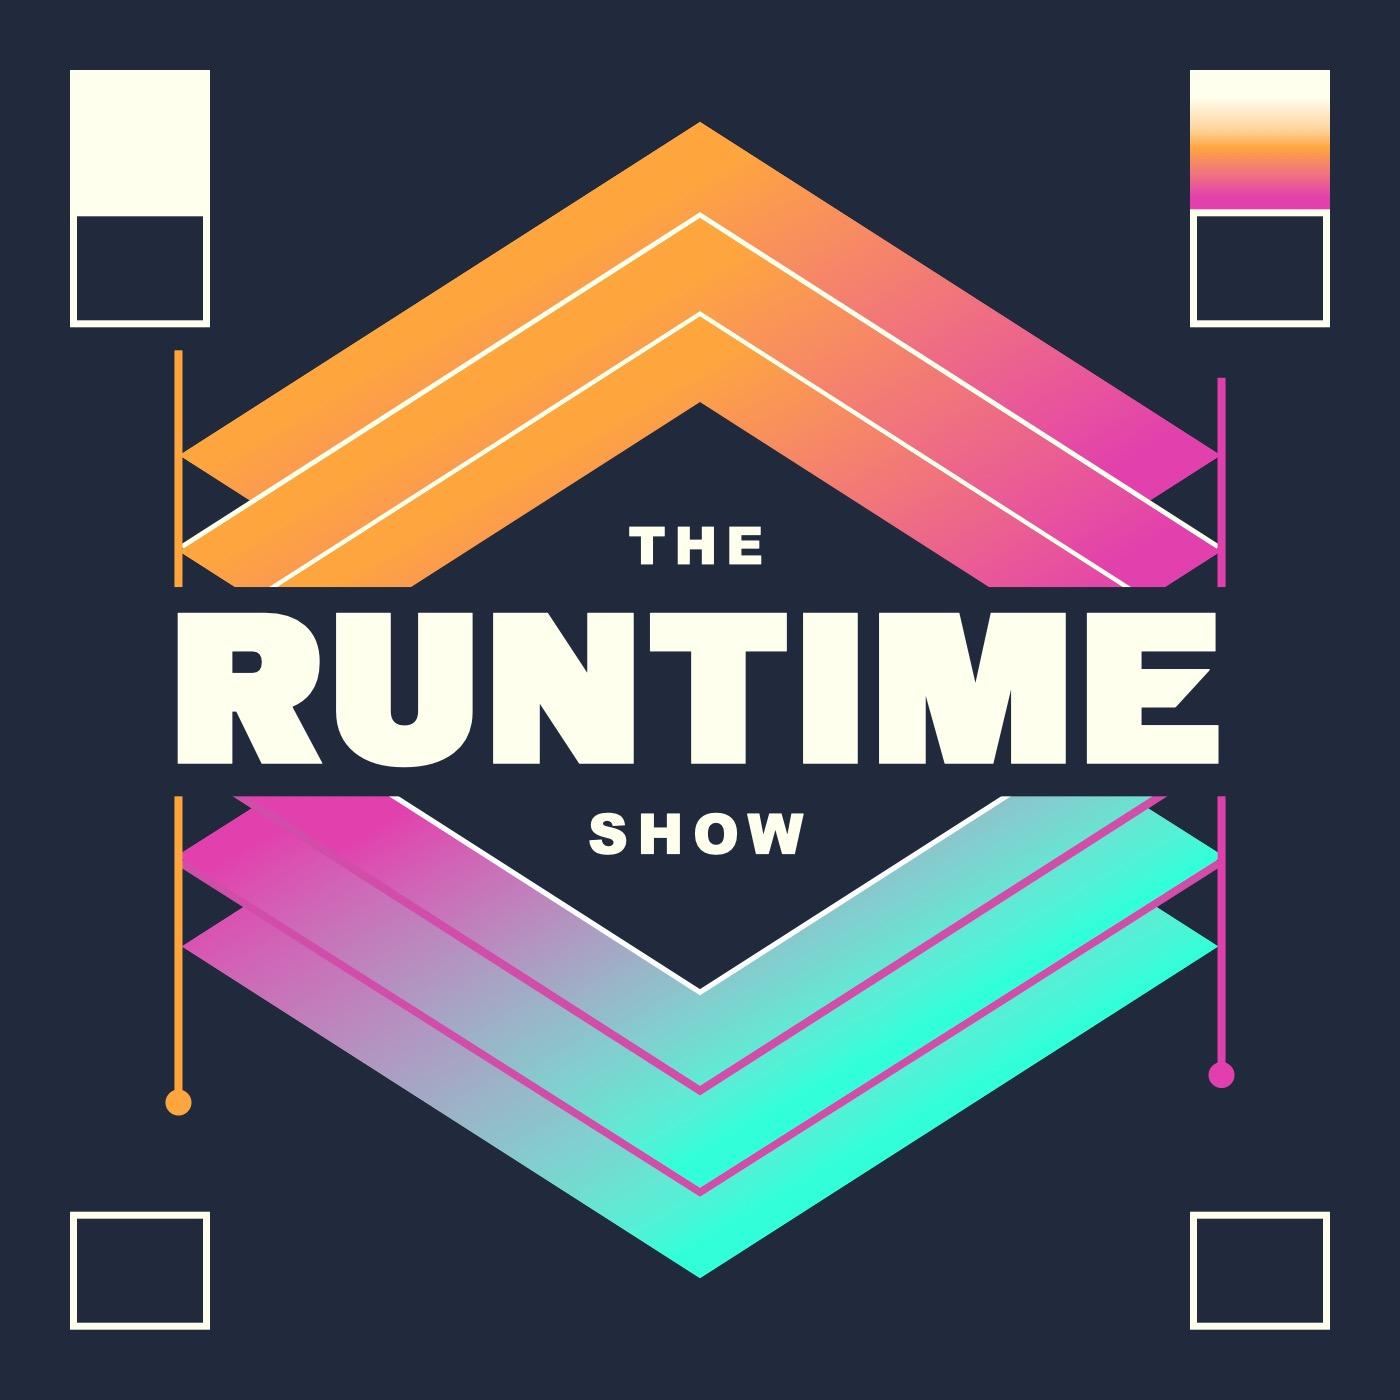 The Runtime Show